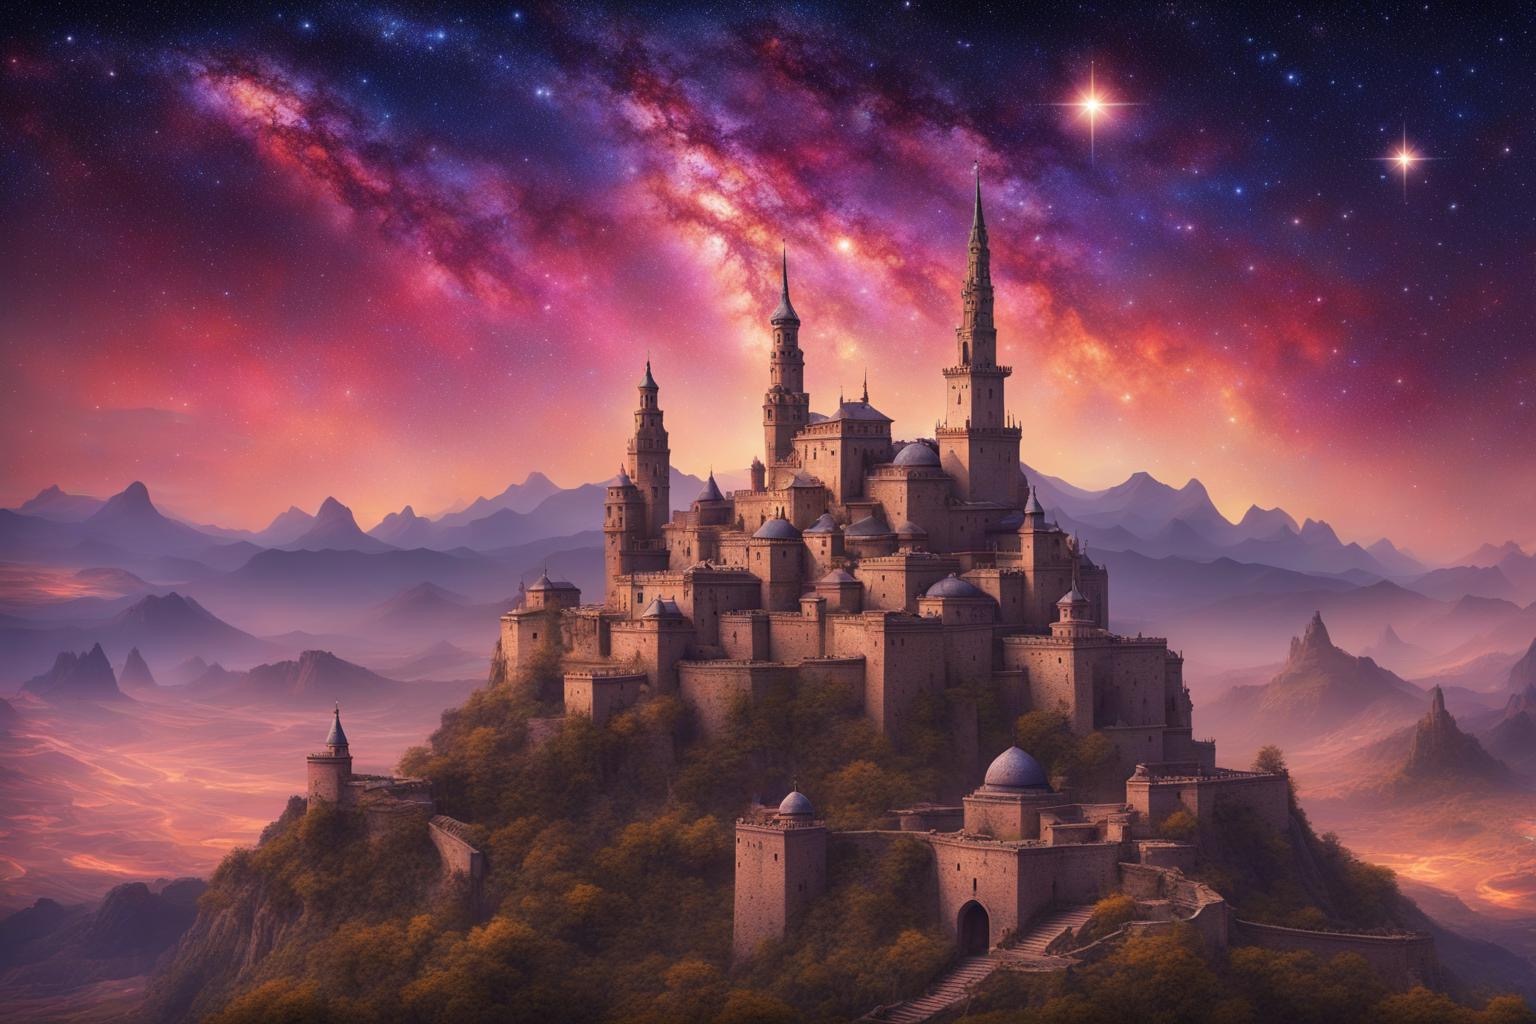 You got: Celestial Citadel! Pick Some Polarizing Foods to Reveal the Fantasy Realm You’re Headed for in the Afterlife